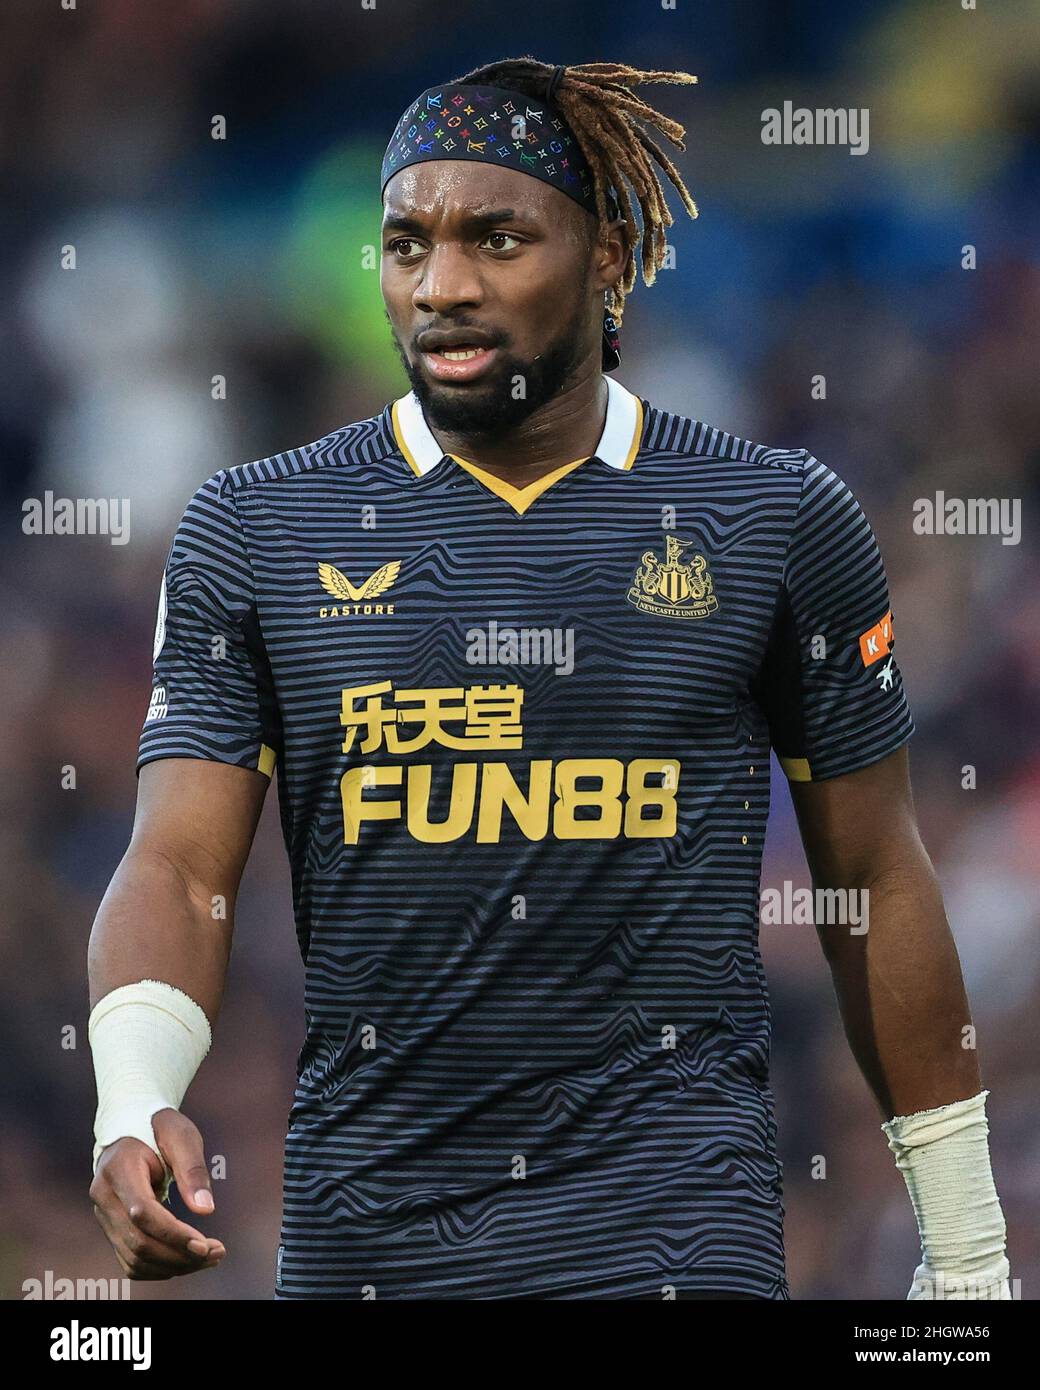 Leeds, UK. 22nd Jan, 2022. Allan Saint-Maximin #10 of Newcastle United during the Premier League fixture Leeds United vs Newcastle United at Elland Road, Leeds, UK, 22nd January 2022 Credit: News Images /Alamy Live News Stock Photo